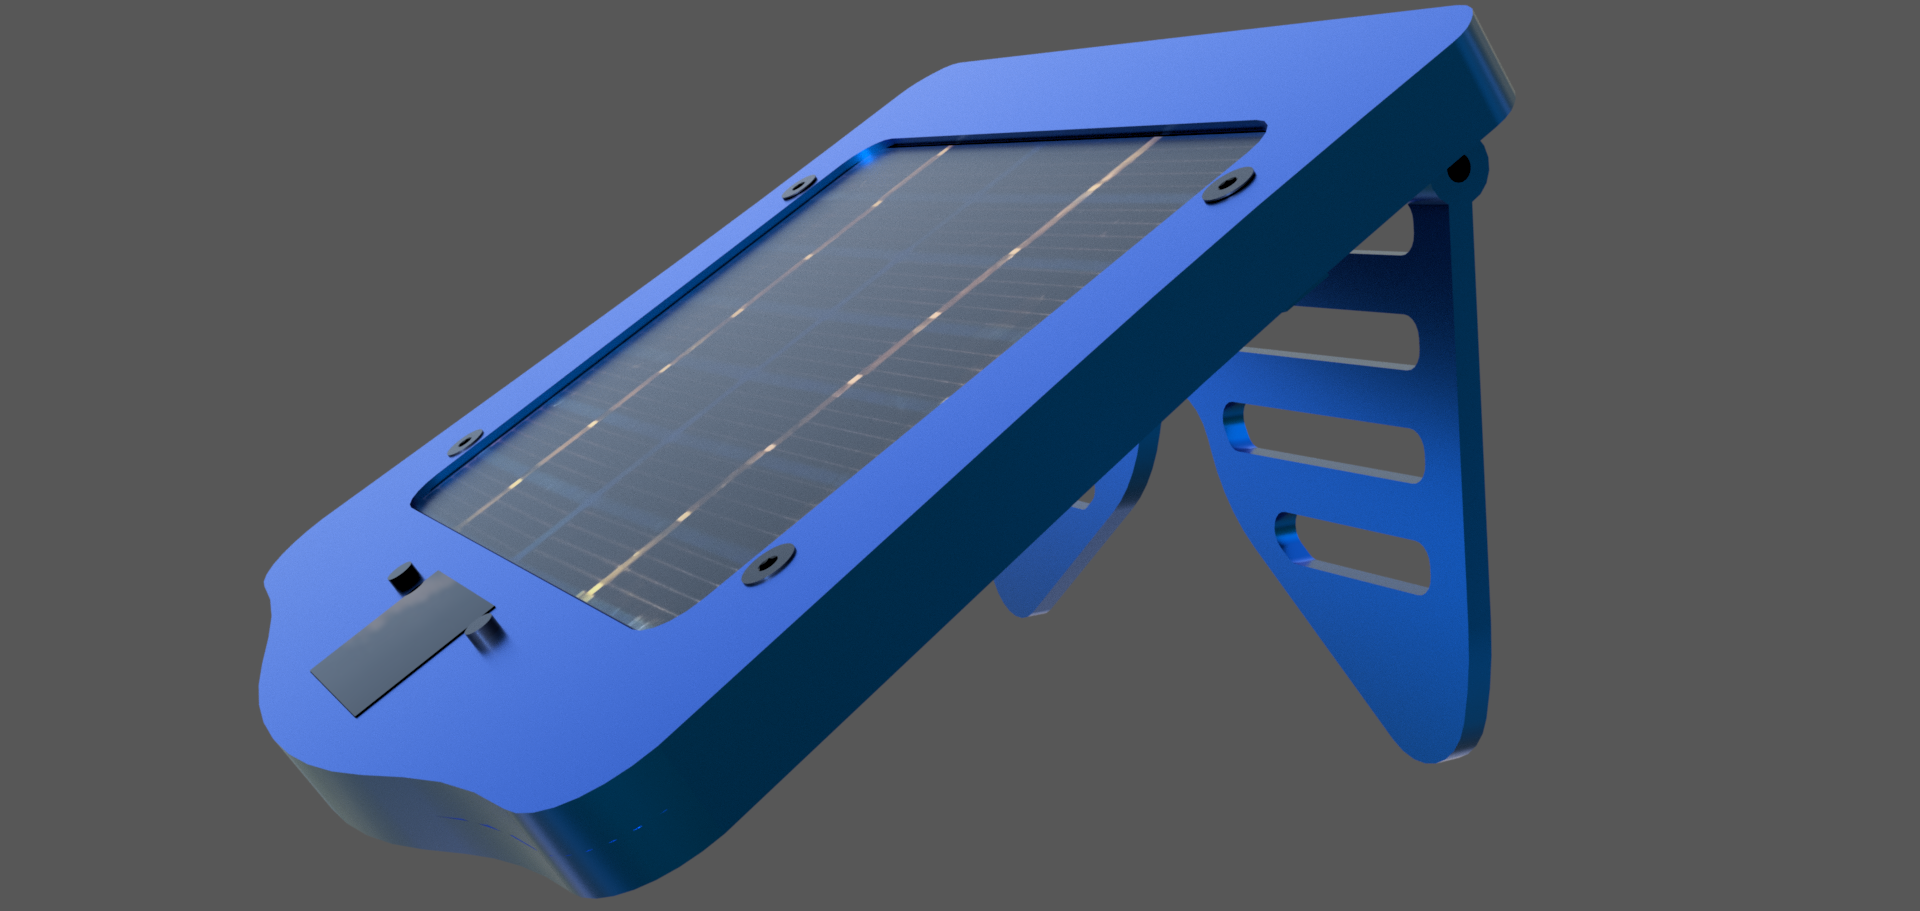 img/albums/cad/SOLARPANELCASE1.png